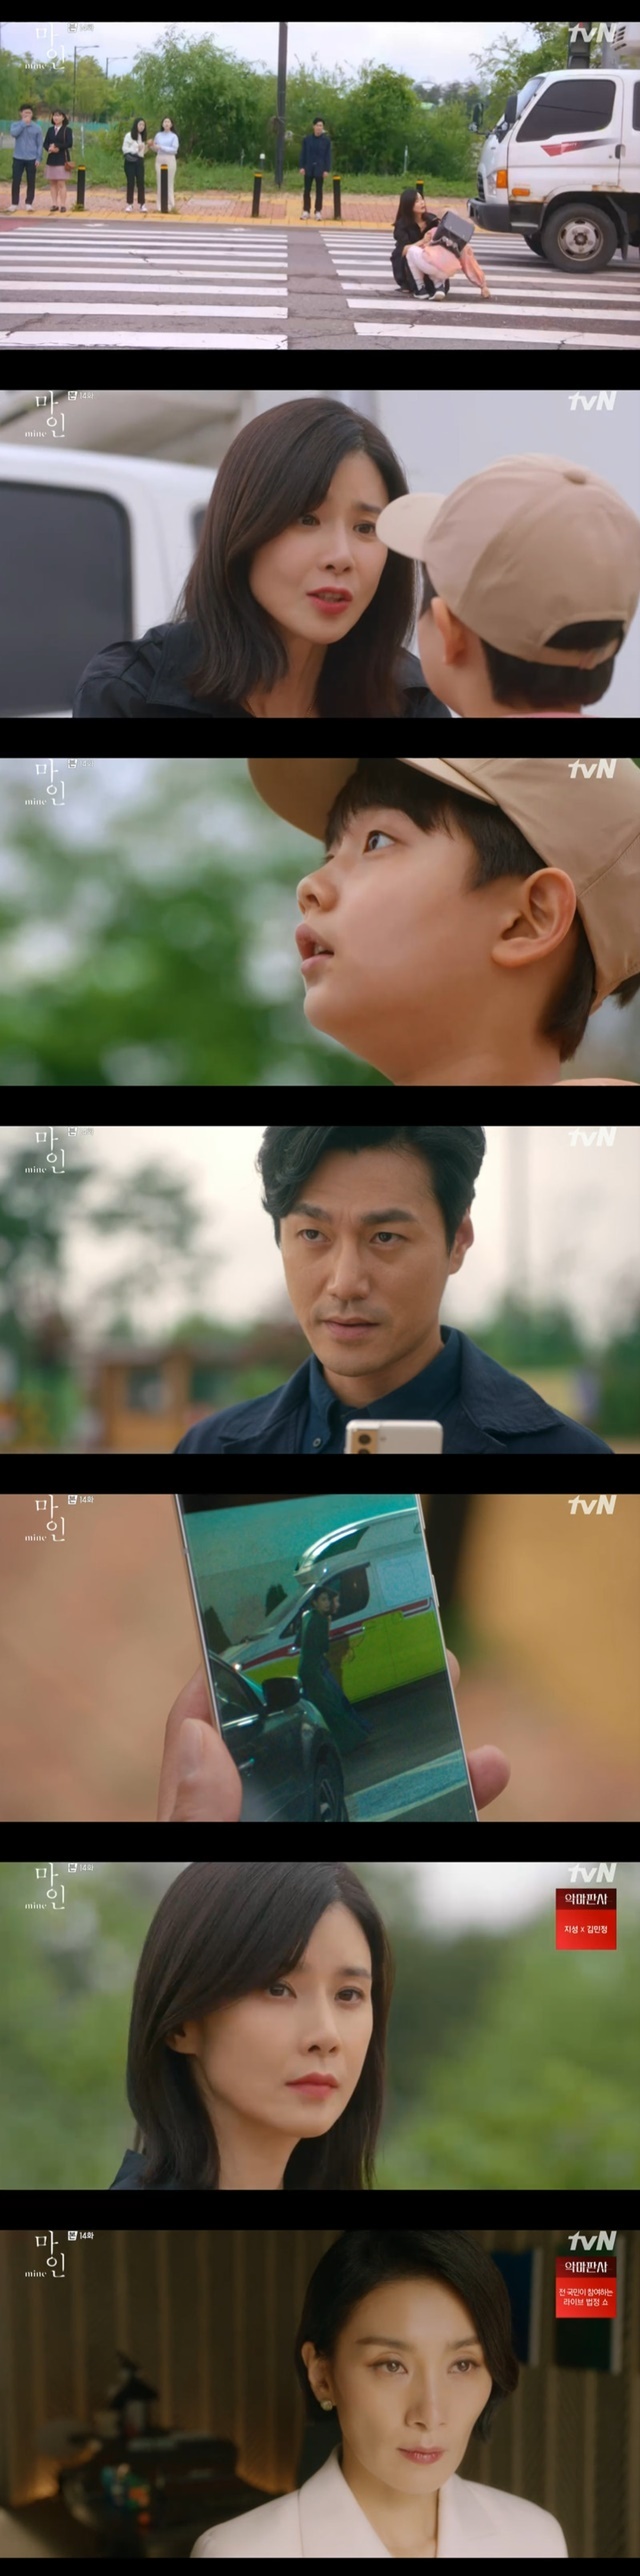 The person who moved Lee Bo-young to the emergency room on the day of Lee Hyeonwuks death was Kim Seohyun.In the 14th episode of TVNs Saturday drama Mine, which aired on June 20, BackDetective (Choi Young-jun) gradually approached the reality of the incident.Han (Chung Dong-hwan) persuaded Son Han Ji-yong (Lee Hyeonwuk) to put down all of his own, saying, I will be a father now, but Han Ji-yong said, I can not do that.Han Ji-yong added to the eerieness by instructing Meade to take the prescription for medicine, saying, Go to the hospital instead of me, ask me to prescribe it a little hard.Seo Hee-soo told Emma Nun (Je Su-jung) that Han Ji-yong hurt people in the field and told Han Ji-yong to let him know Kwak Hyun-dong he owns or persuade Han Ji-yong to embroidery.Emma Nun knelt down in front of Han Ji-yong and wept to persuade her to embroidery, but Han Ji-yong ignored her, Tell God, abandon me.After the death of Han Ji-yong, Seo Hee-soo met Emma Nun again with the loss of memory and asked about the last text.Emma Nun said, I watched the process from afar, but I thought I was living well.I wish Ji-yong had known that there was no place to mind in the house so long. He said, I met Han Ji-yong knowing that he was doing something bad.Seo Hee-soo asked Emma Nun, Did you say that Nun saw me on the stairs that day? Did I really hit you? Emma Nun said, Yes.I actually doubted her, he said. And then I found out she had lost Memory. Then I remembered. There was another.I thought that Sister Hee-soo might be a victim, too. Seo Hee-soo asked Emma Nun meaningfully, Do you believe me?BackDetective (Choi Young-jun) doubted Seo Hee-soos loss of memory, knowing that Seo Hee-soo had made a remarkable memory loss act in his unopened debut.BackDetective checked his medical records and found out that Seo Hee-soo was on the emergency room the day Han Ji-yong died.Seo Hee-soo was not a person standing on the stairs but a person who crashed with Han Ji-yong, and there was a record of being treated for injured pelvic bone in the incident.BackDetective reasoned that if you buy that much, you may lose Memory.In the meantime, Yang Sun-hye (Park Won-sook) suspected Memory, who saw the bloody hands of his daughter-in-law, Seohyun, and the Maids suspected Kim Sung-tae (Lee Jung-ok) who disappeared.BackDetective suspected that Lee Hye-jin was the one who drove Seo Hee-soo to an emergency room, but Lee Hye-jin said he was in a foreign country on the day of the accident.Back wanted to go to Seo Hee-soo and meet with Son Han Ha-jun (Jung Hyun-joon), and when Han Ha-jun was almost hit by a car, Seo Hee-soo threw himself and saved him and said, Did your mother tell you that you are the only one who can protect you in the world?